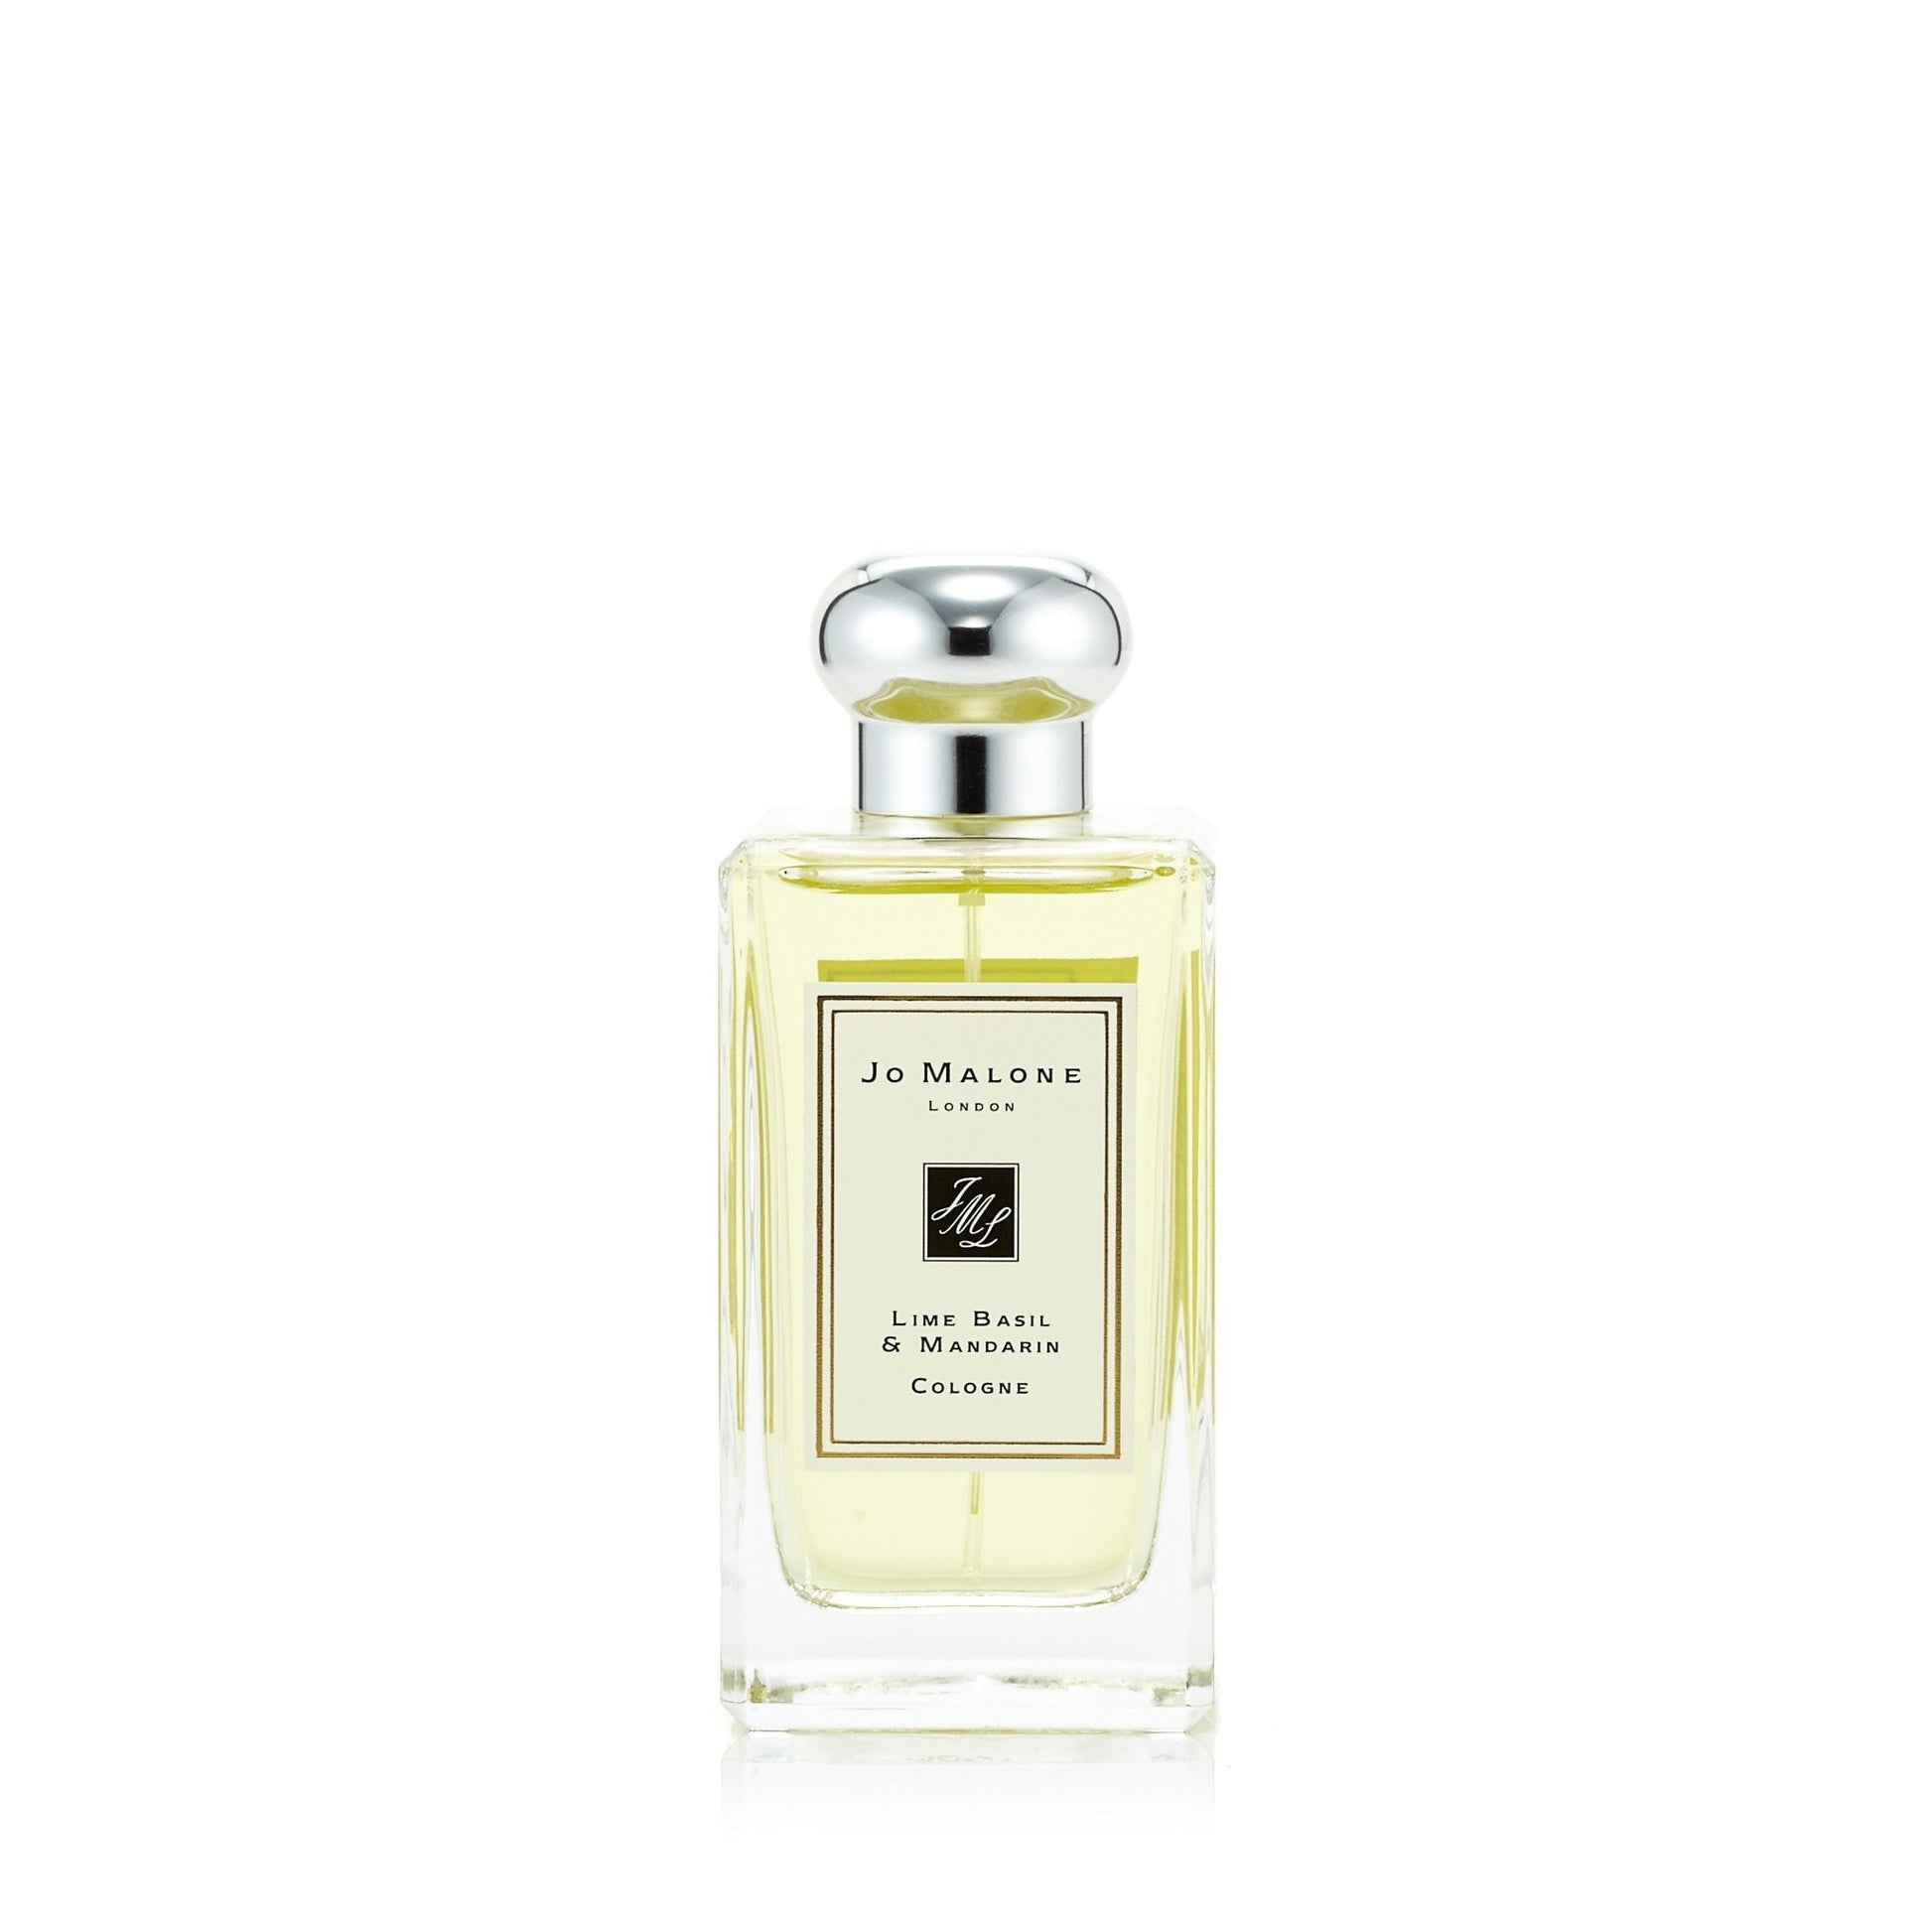 Lime Basil & Mandarin Cologne for Women and Men by Joe Malone 3.4 oz. Click to open in modal